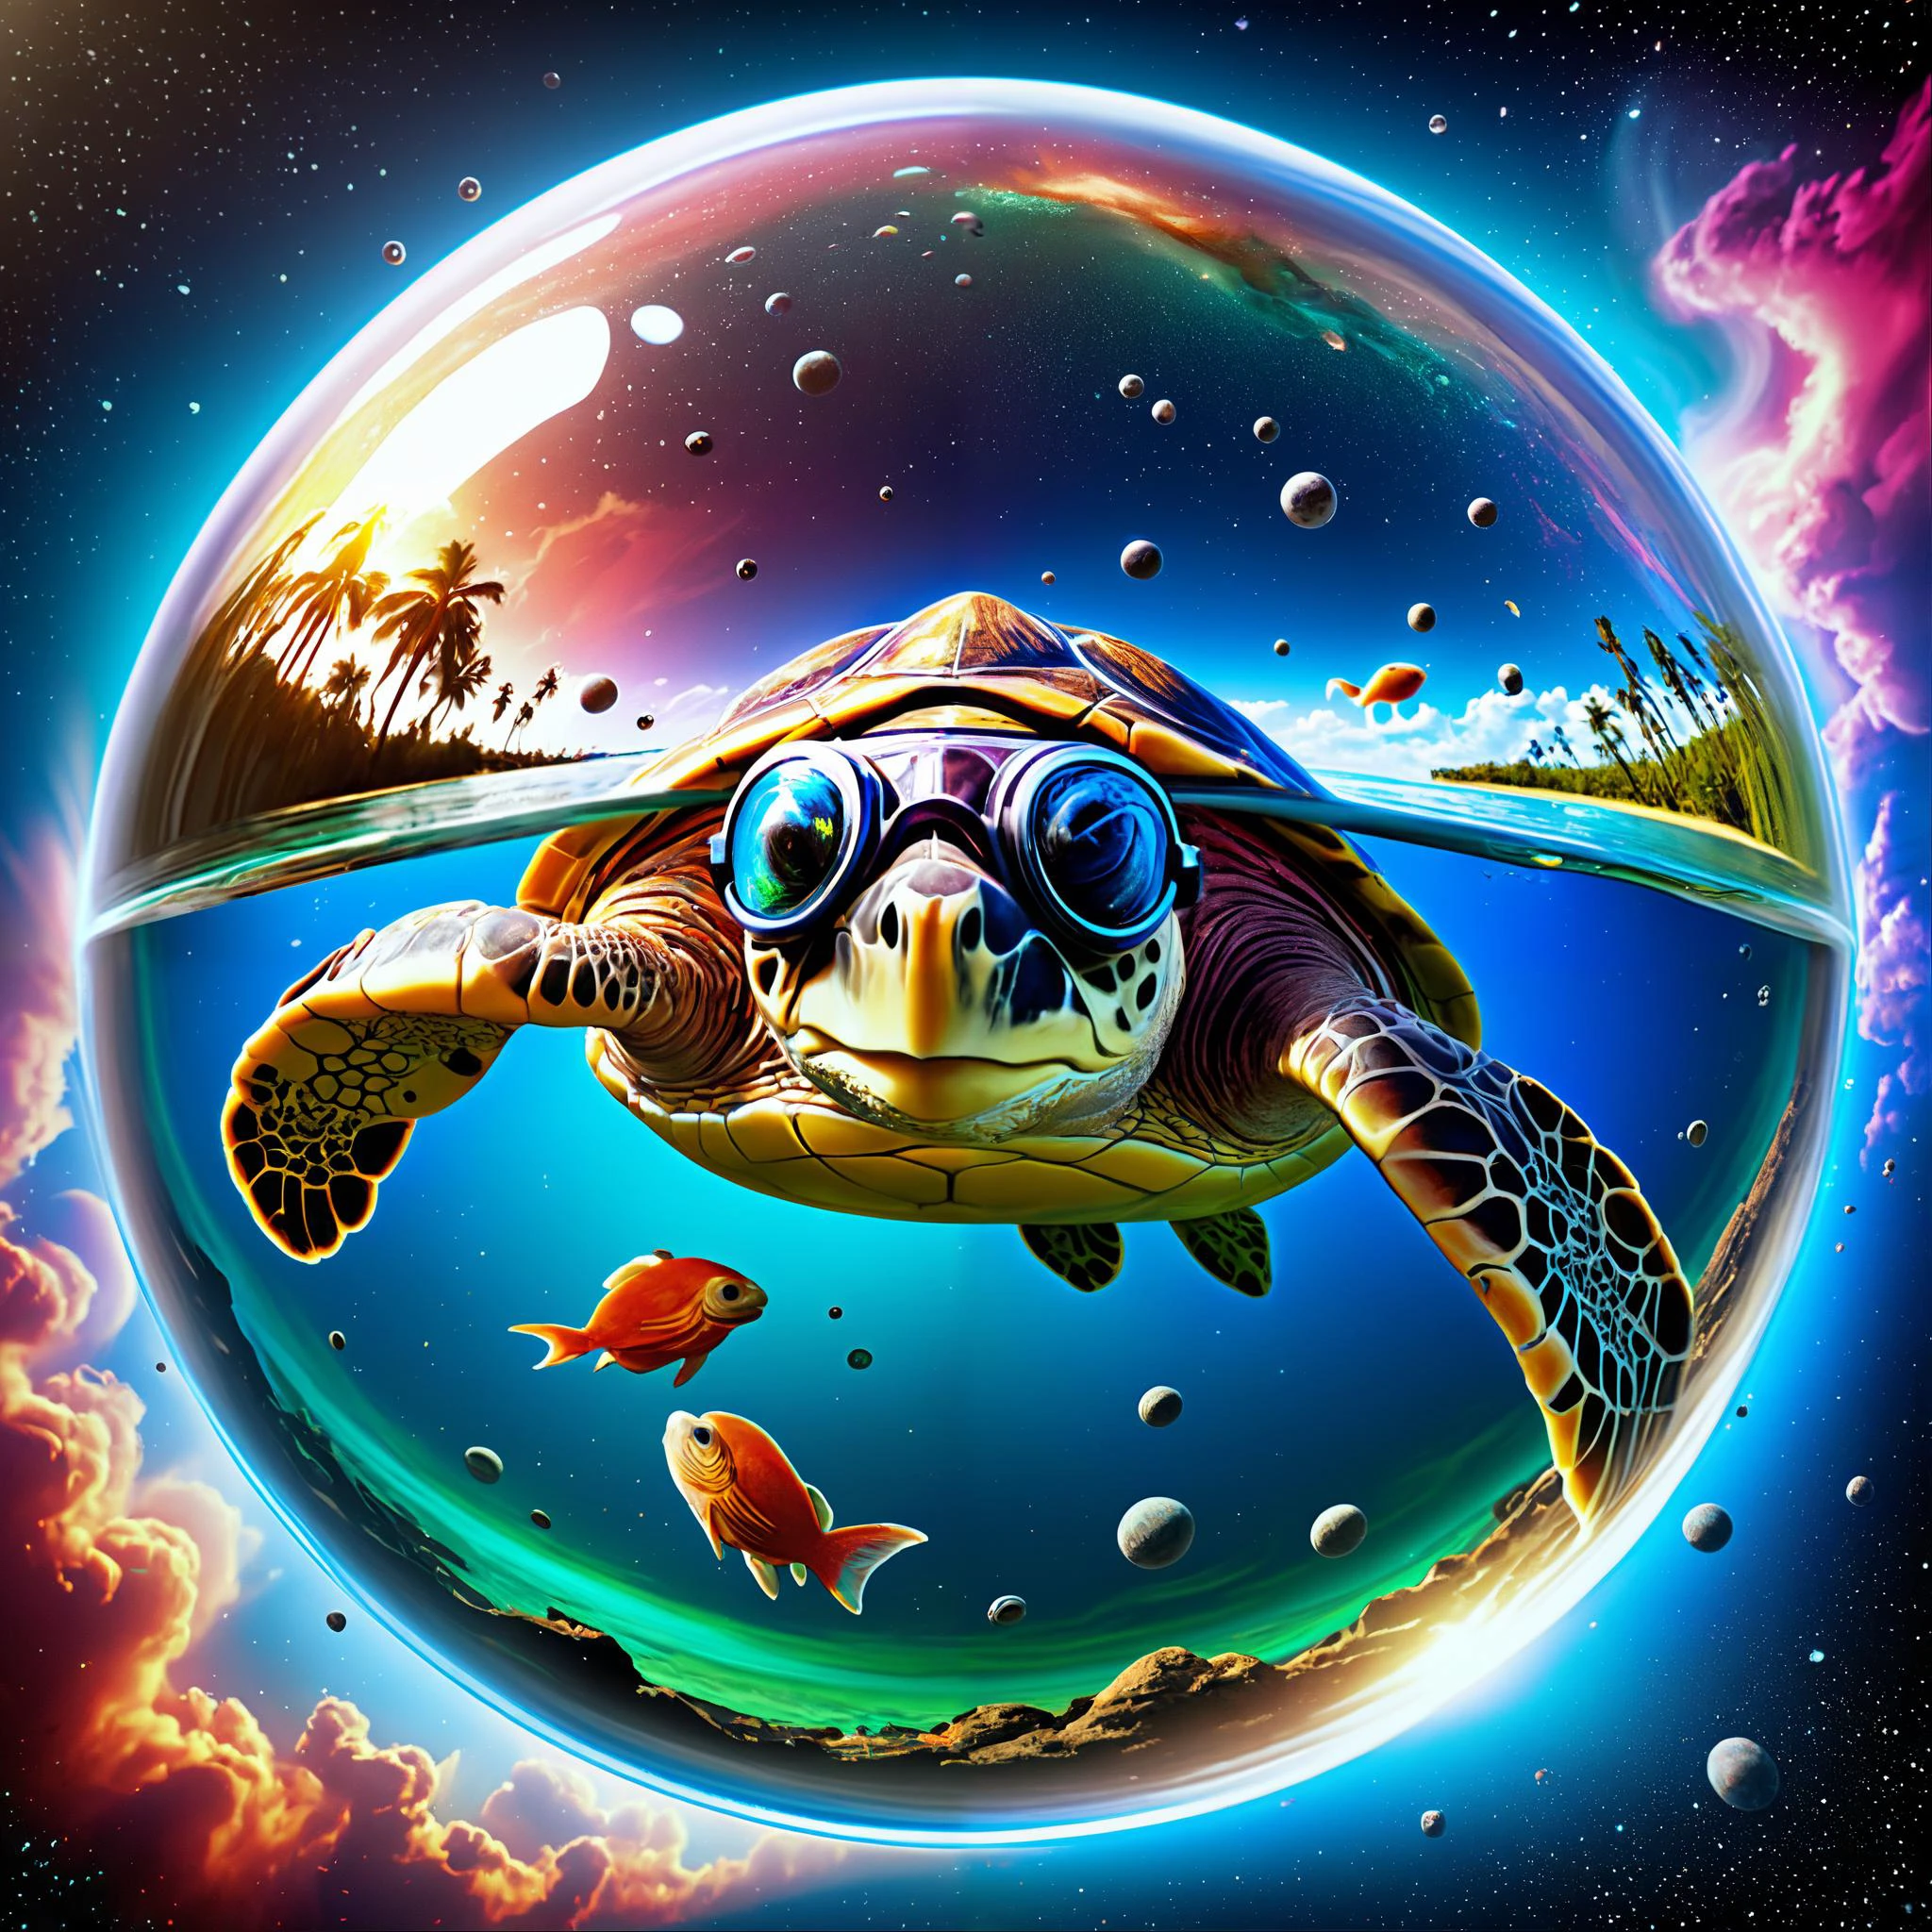 fisheye inside a bubble, imagine a turtle wearing (mirrored_pilots_goggles:1.2) swimming through a nebula as if space were an ocean, surrealism, pixar style, highly_detailed_textures, intricate_detail, exquisite_coloring, rule_of_thirds